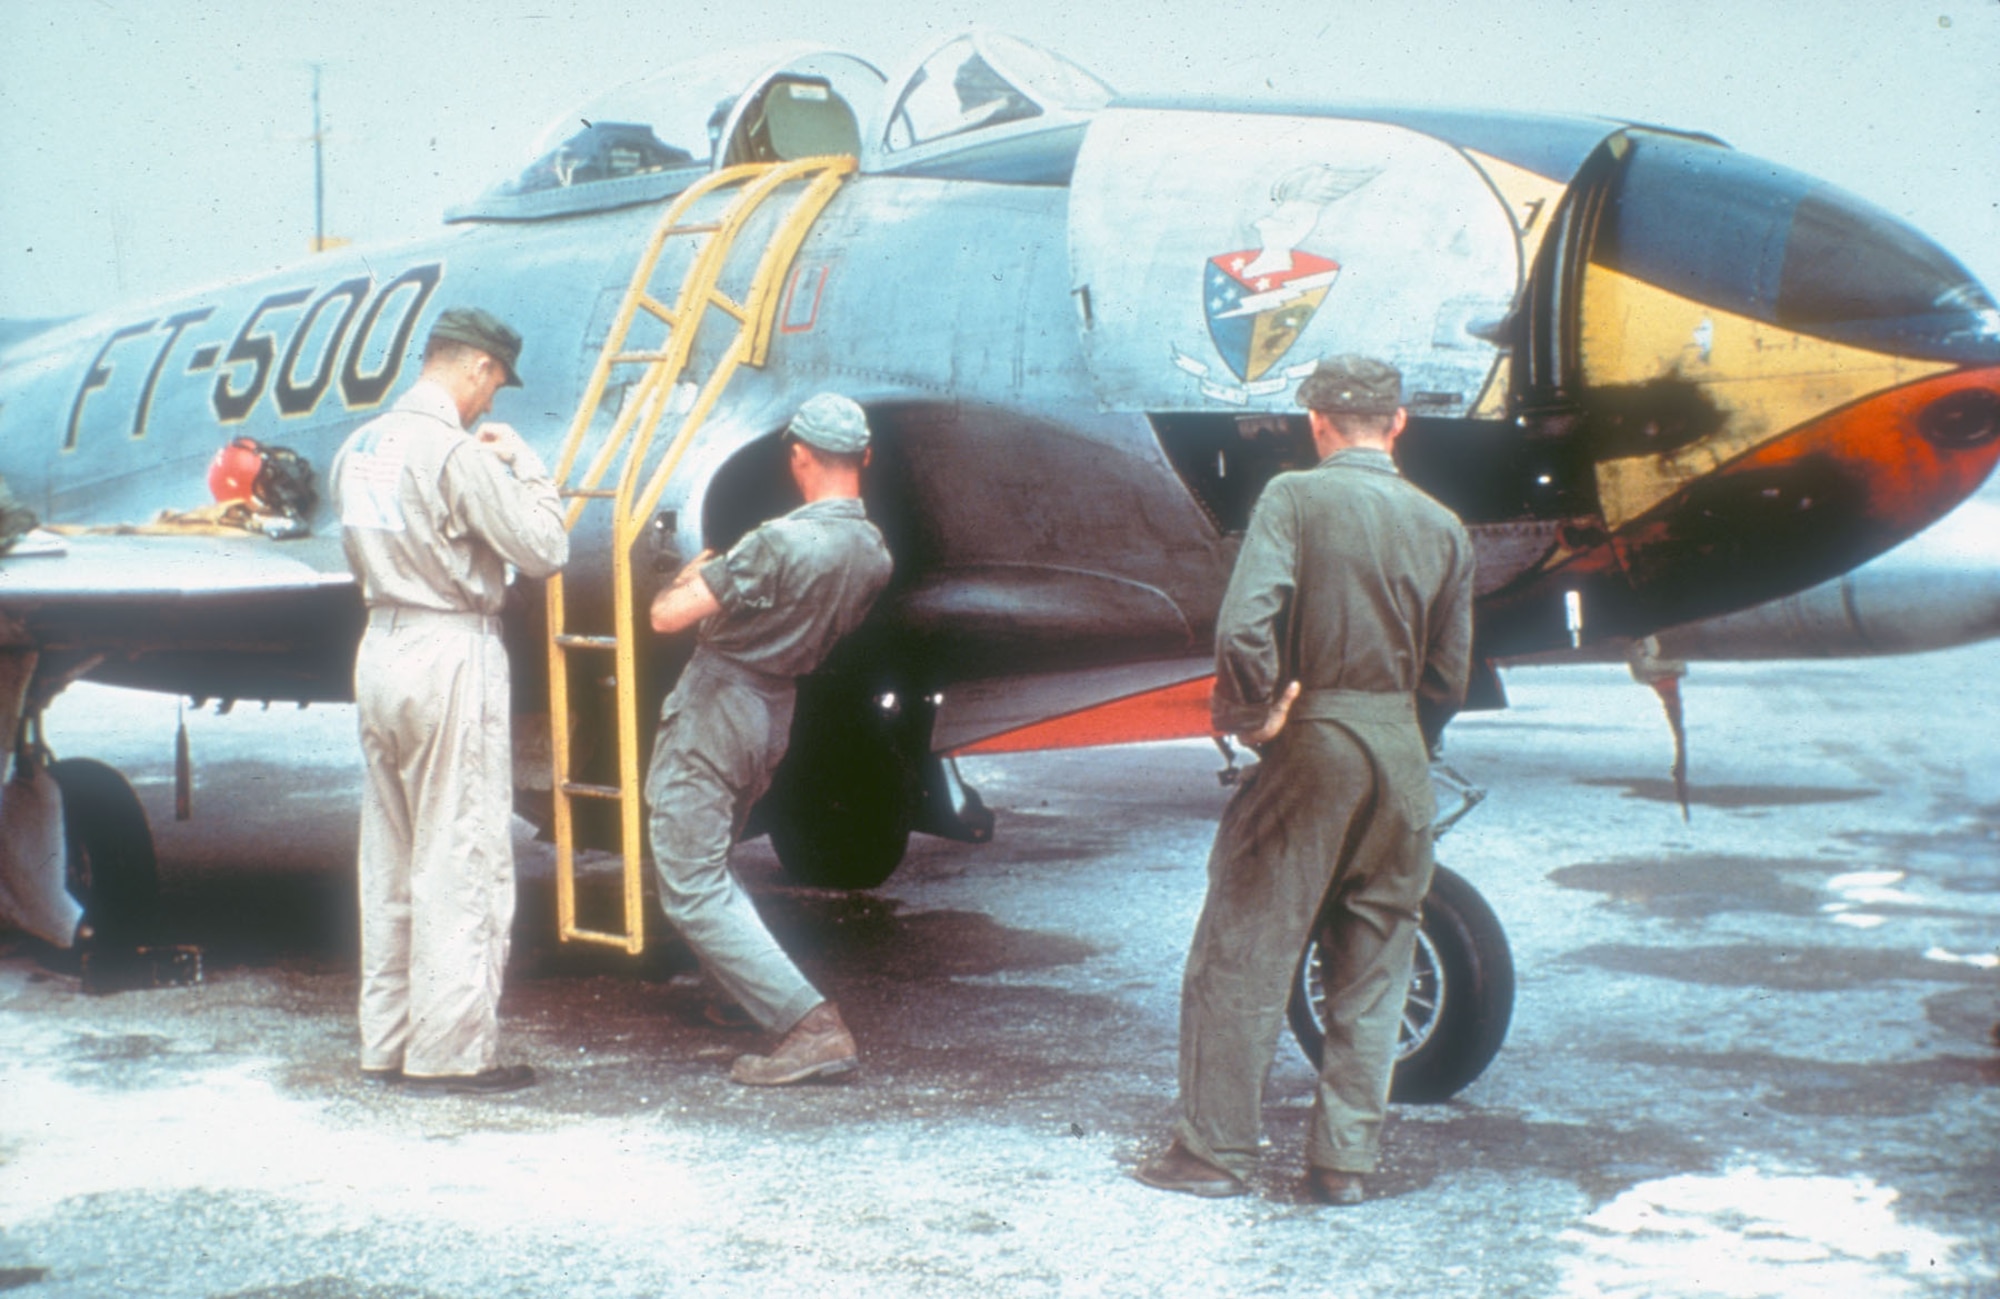 An F-80 pilot removes his flight gear as the ground crew checks the aircraft after a mission. (U.S. Air Force photo)